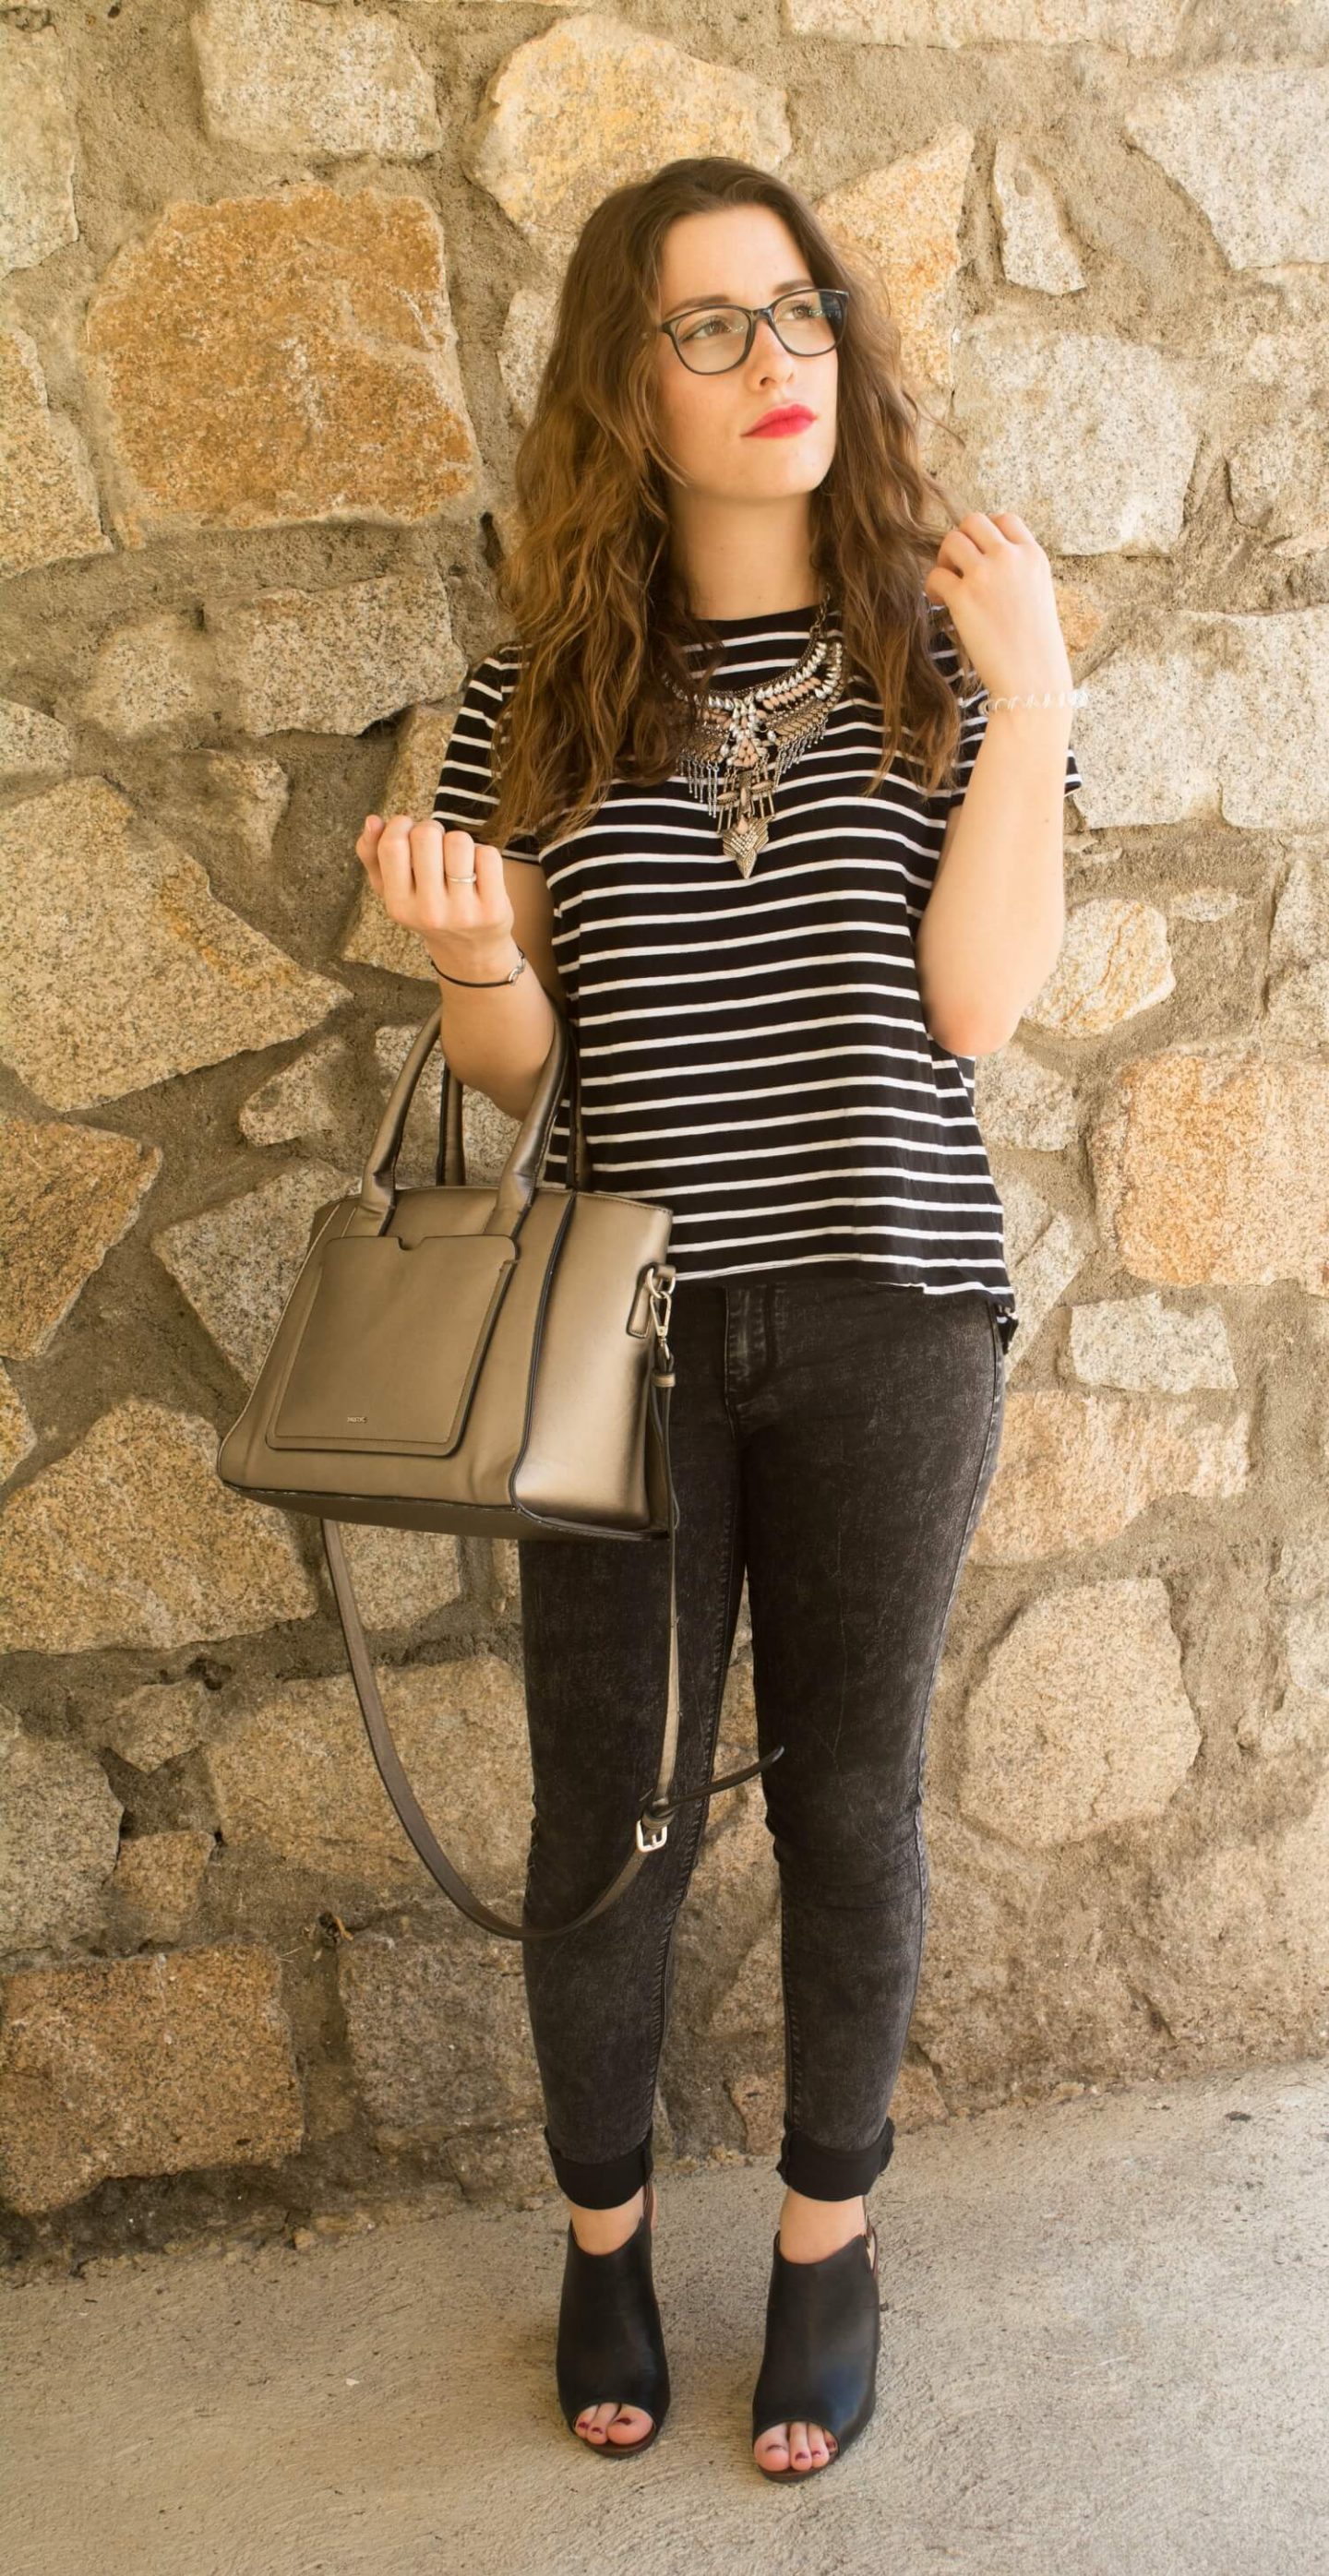 New #outfit - Casual for work | happinesscoco.com